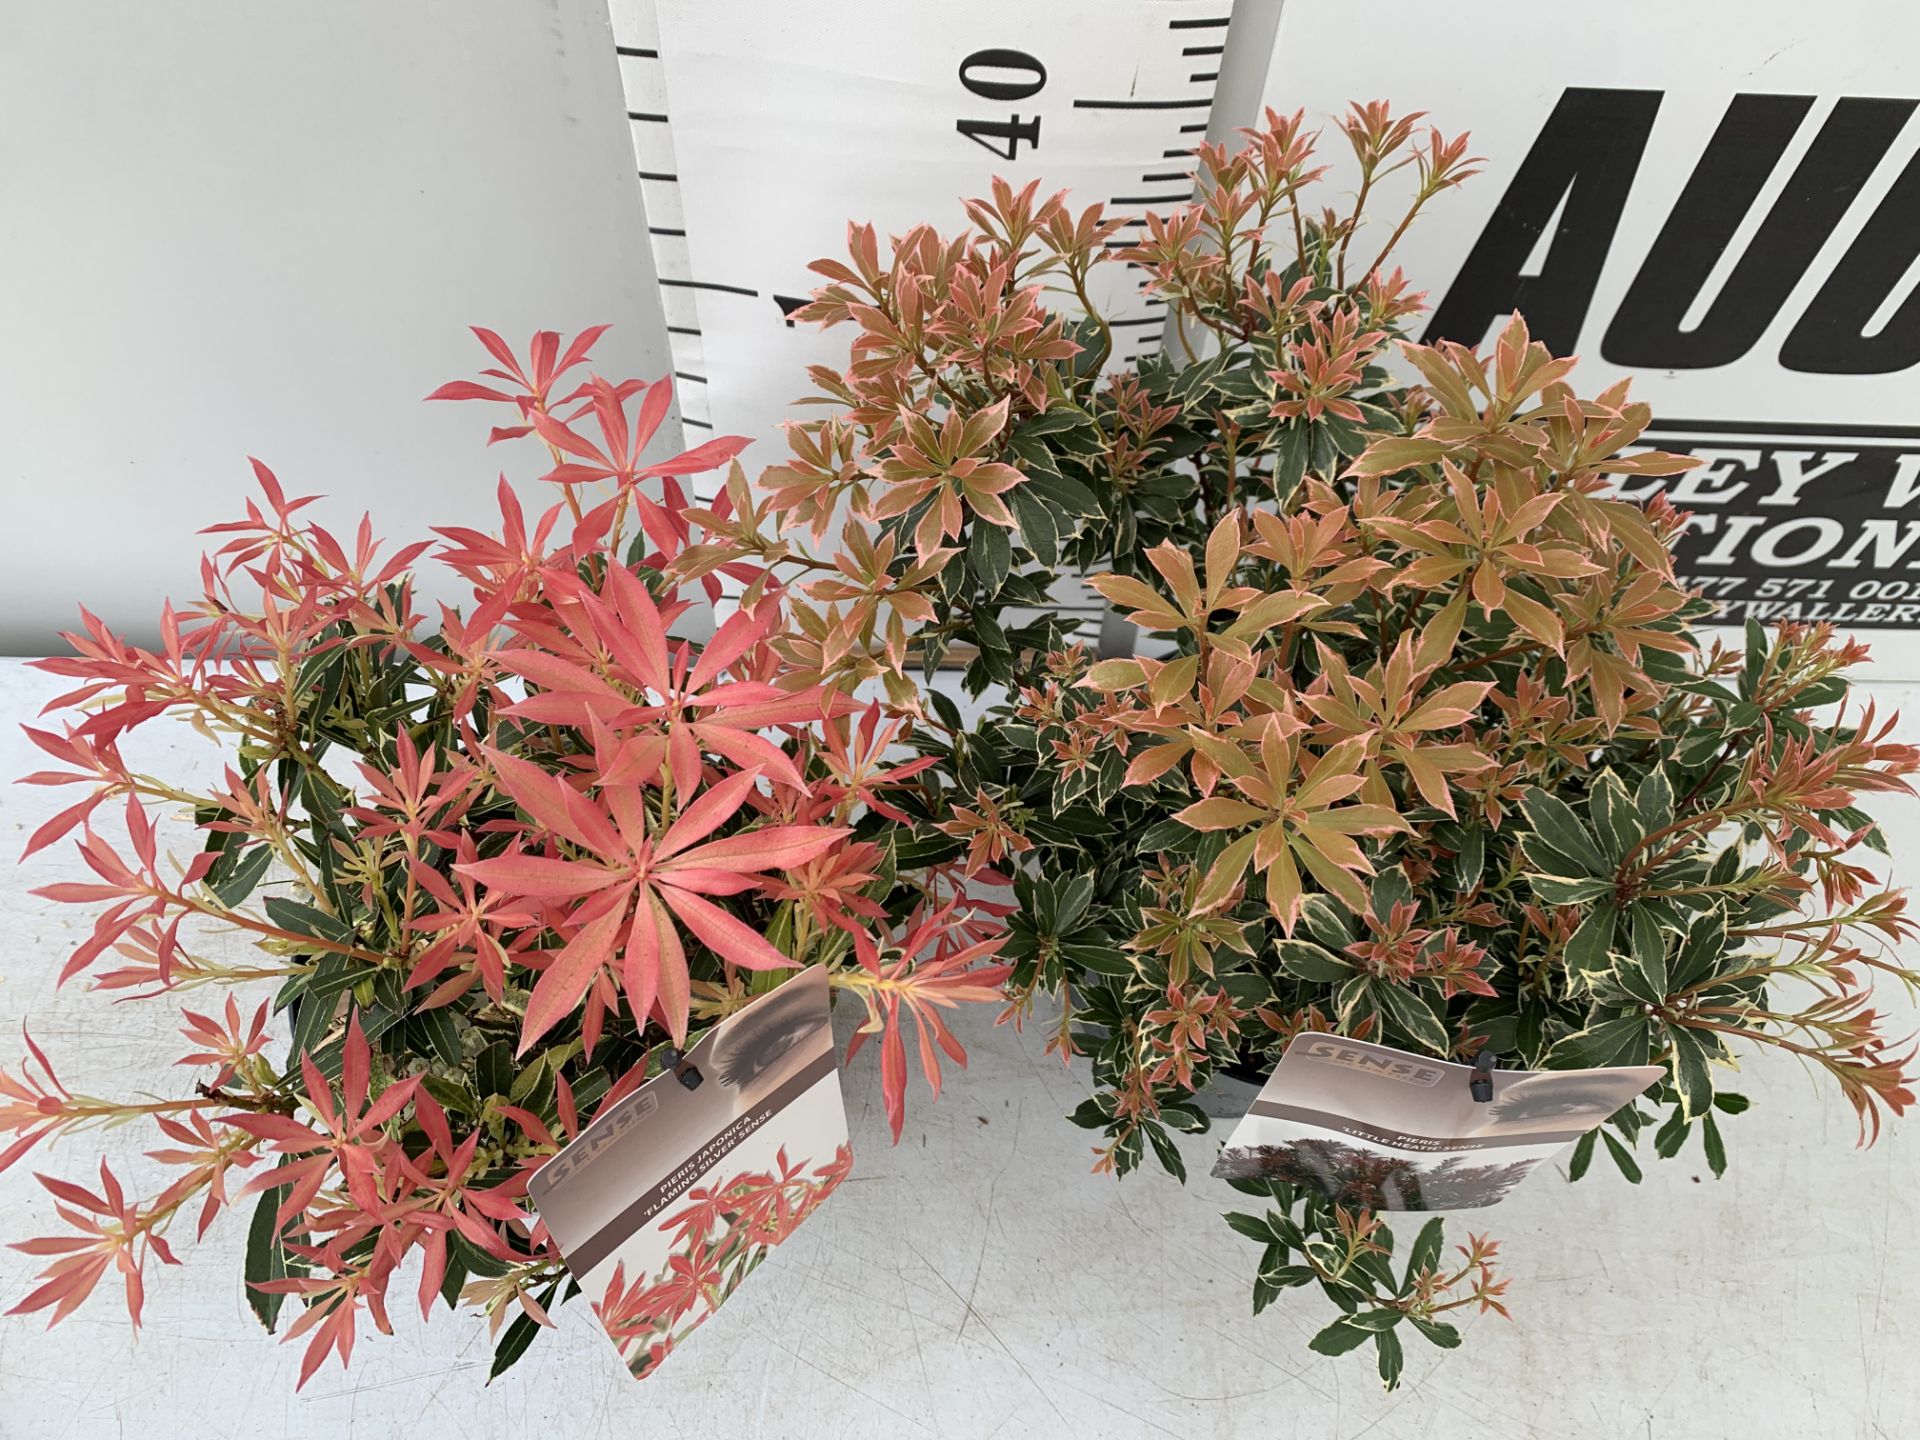 TWO PIERIS JAPONICA LITTLE HEATH AND FLAMING SILVER IN 3 LTR POTS 45CM TALL PLUS VAT TO BE SOLD - Image 7 of 10